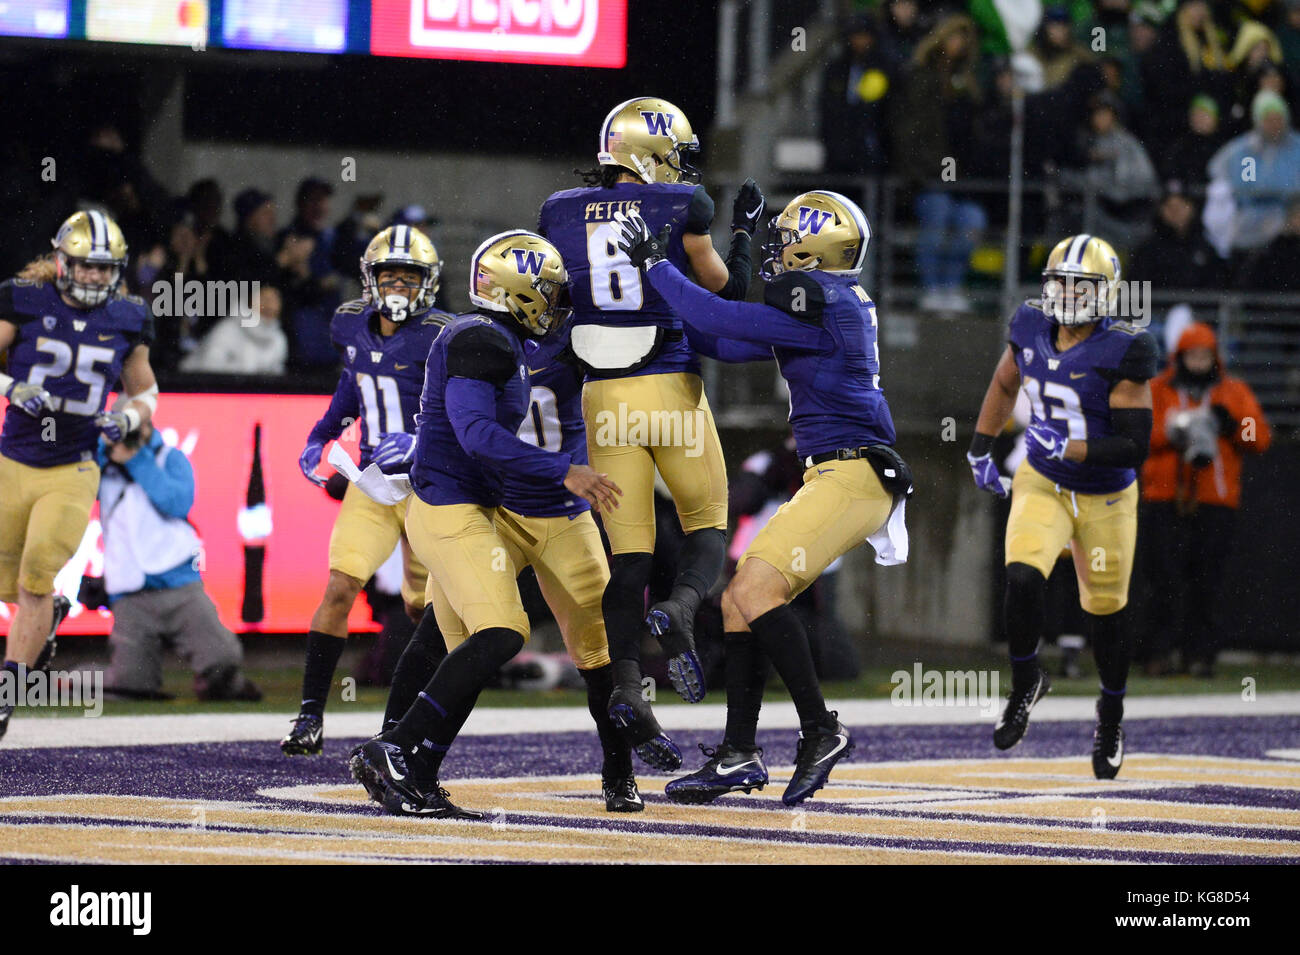 Seattle, WA, USA. 4th Nov, 2017. The UW punt return team celebrates a 64 yard punt return by Dante Pettis (8) in a PAC12 football game between the Oregon Ducks and the Washington Huskies. The game was played at Husky Stadium on the University of Washington campus in Seattle, WA. Jeff Halstead/CSM/Alamy Live News Stock Photo